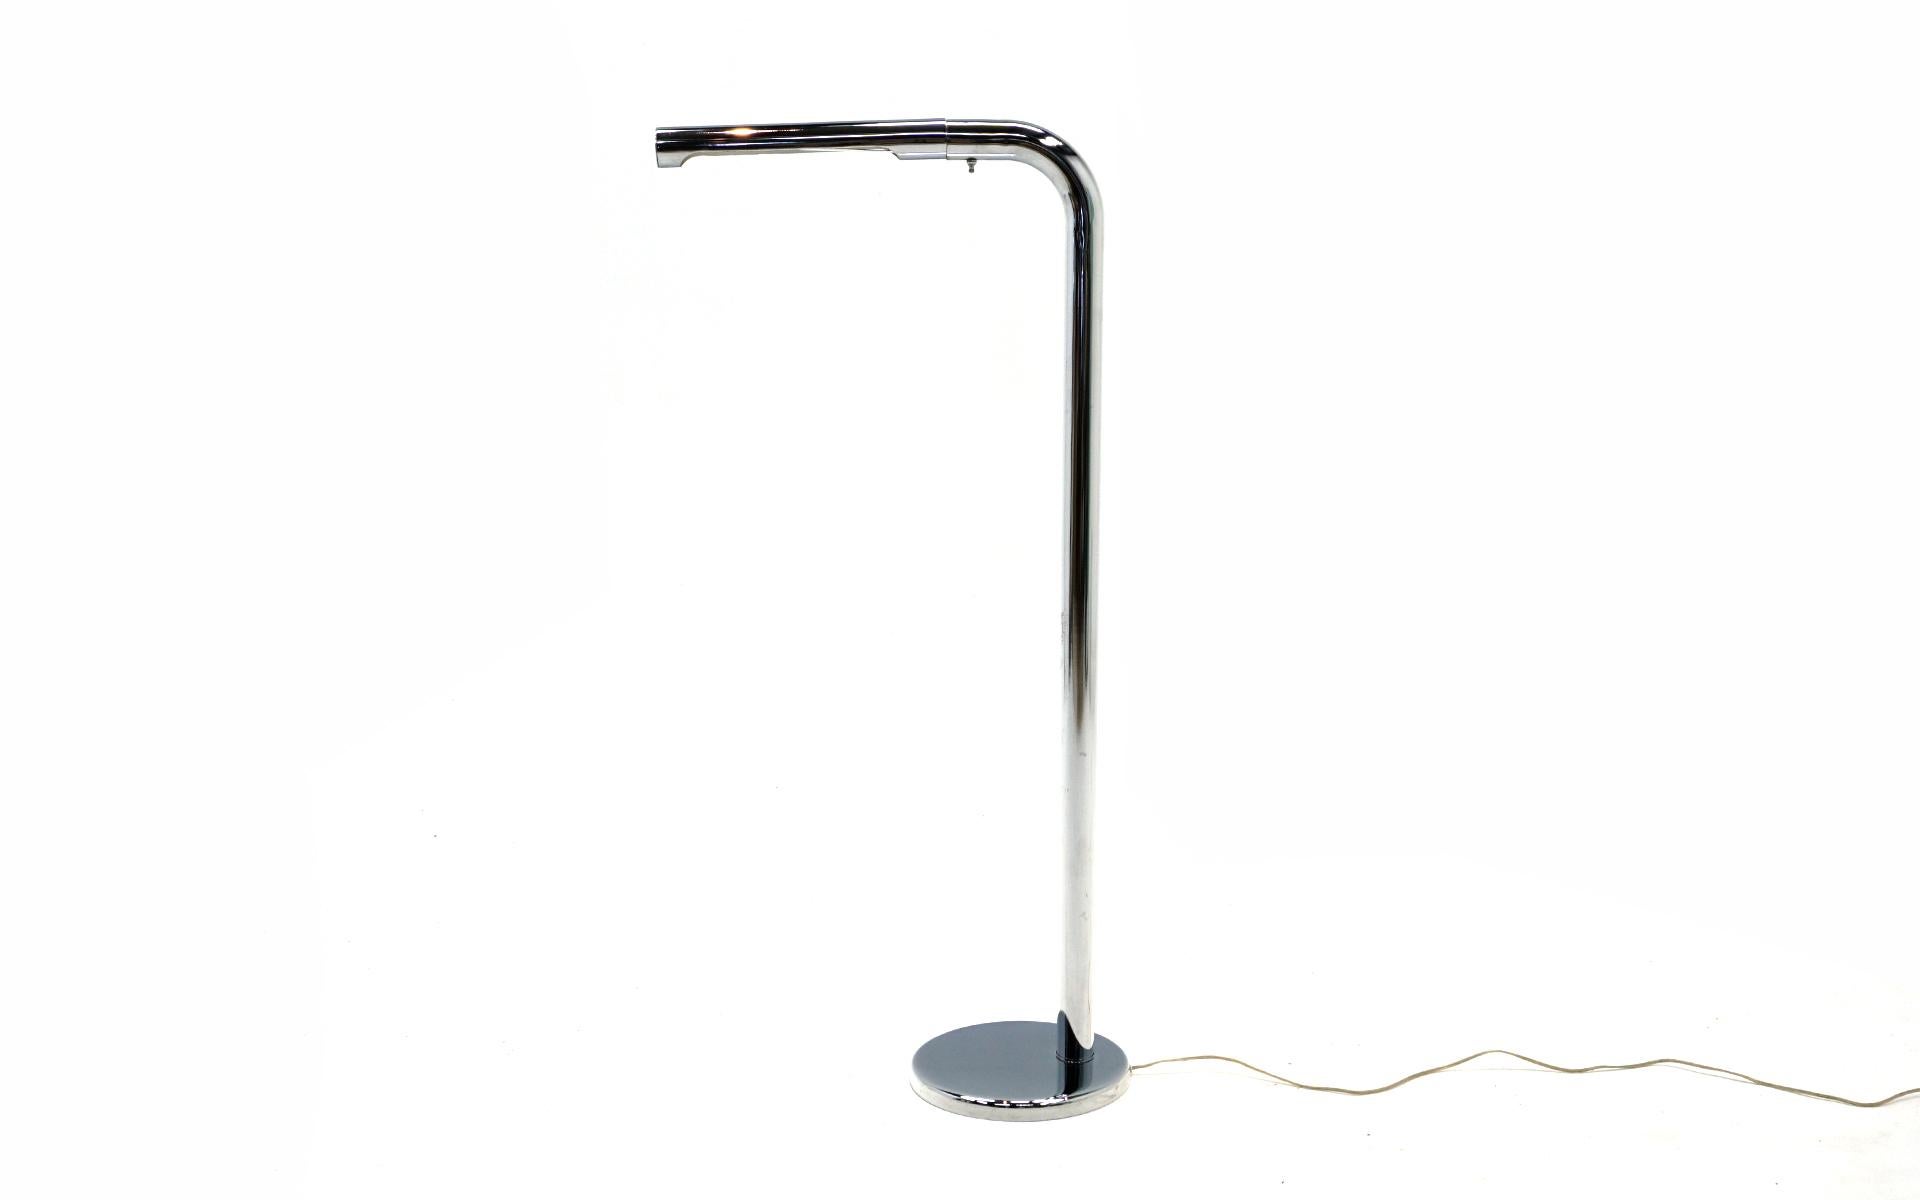 Chromed Steel floor lamp designed by Robert Sonneman, 1960s. The 90 degree angle provides for excellent lighting for reading or accent lighting. Few signs of use with only very light scratches to the finish. This is a fine example of this design.